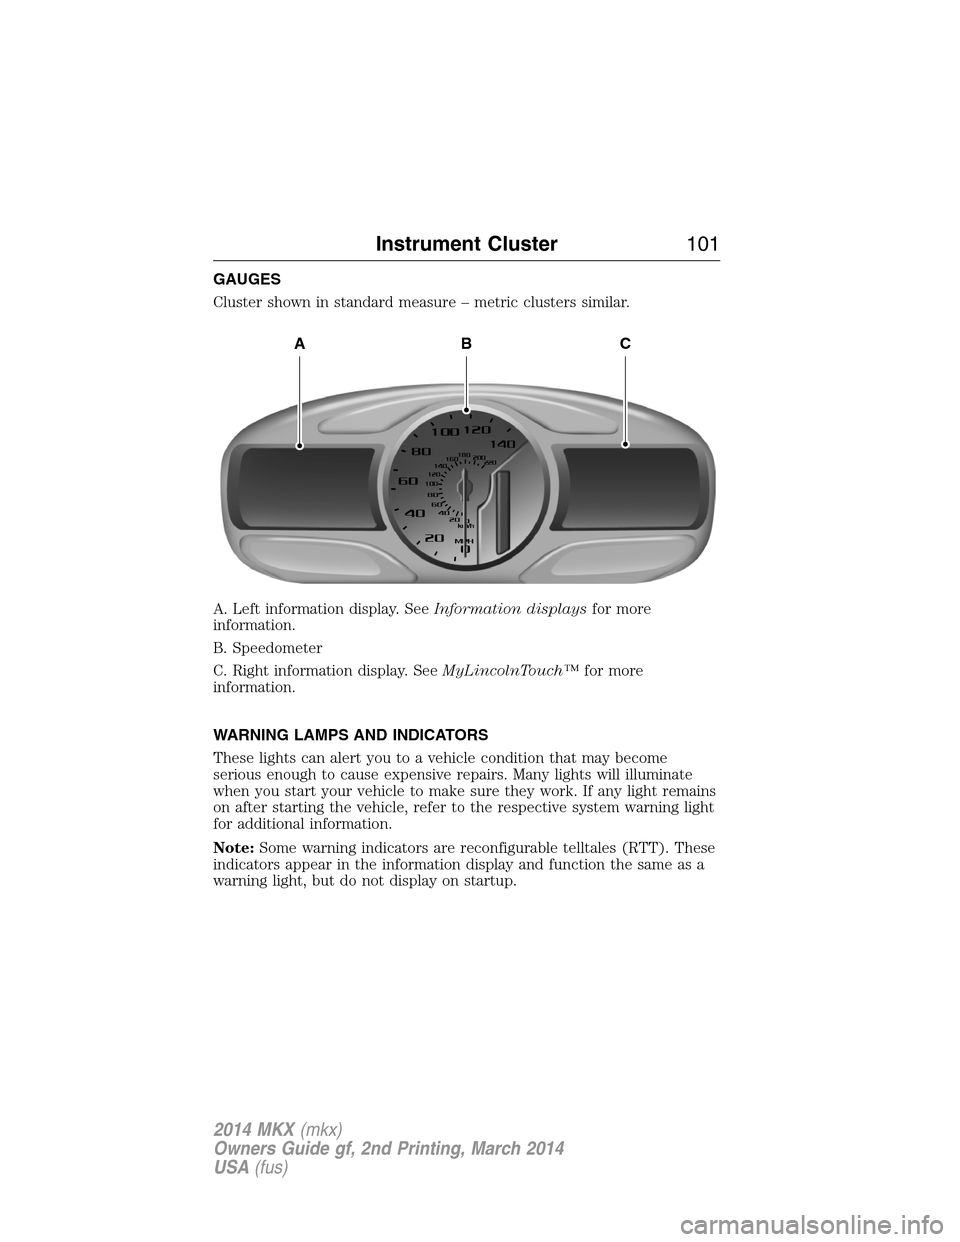 LINCOLN MKX 2014  Owners Manual GAUGES
Cluster shown in standard measure – metric clusters similar.
A. Left information display. SeeInformation displaysfor more
information.
B. Speedometer
C. Right information display. SeeMyLincol